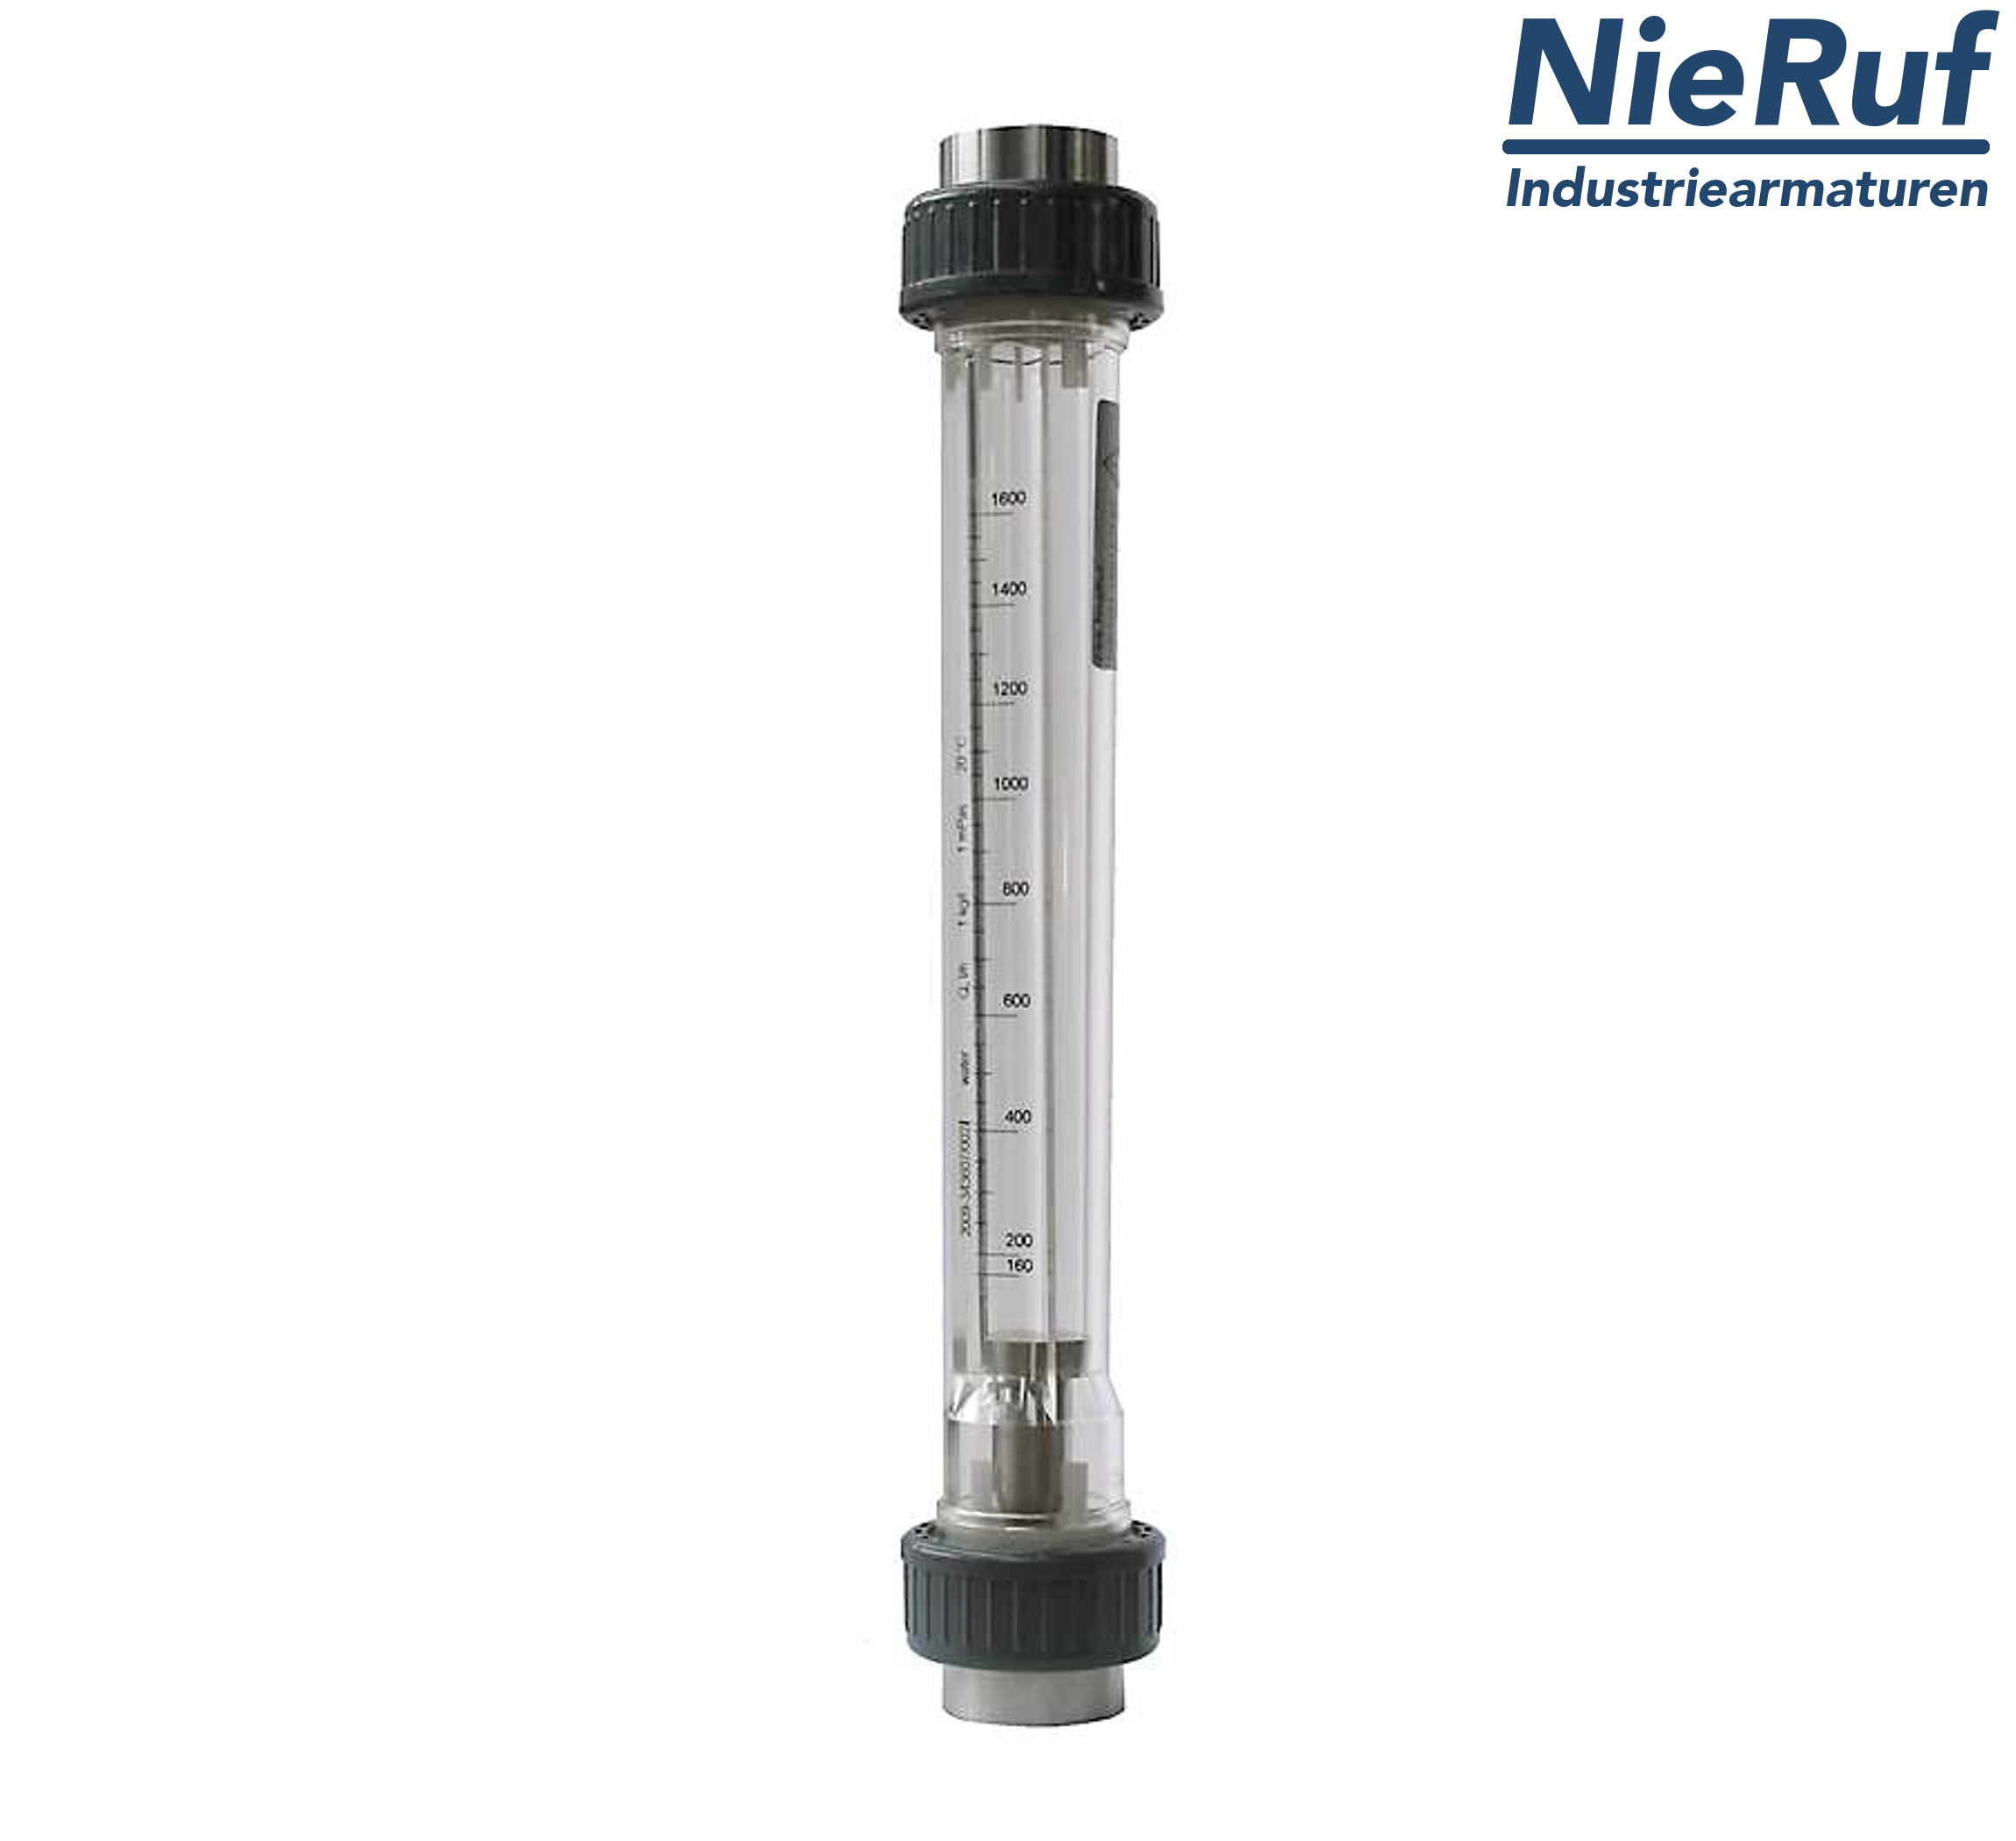 Variable area flowmeter 1" inch 250.0 - 2500 l/h water FKM